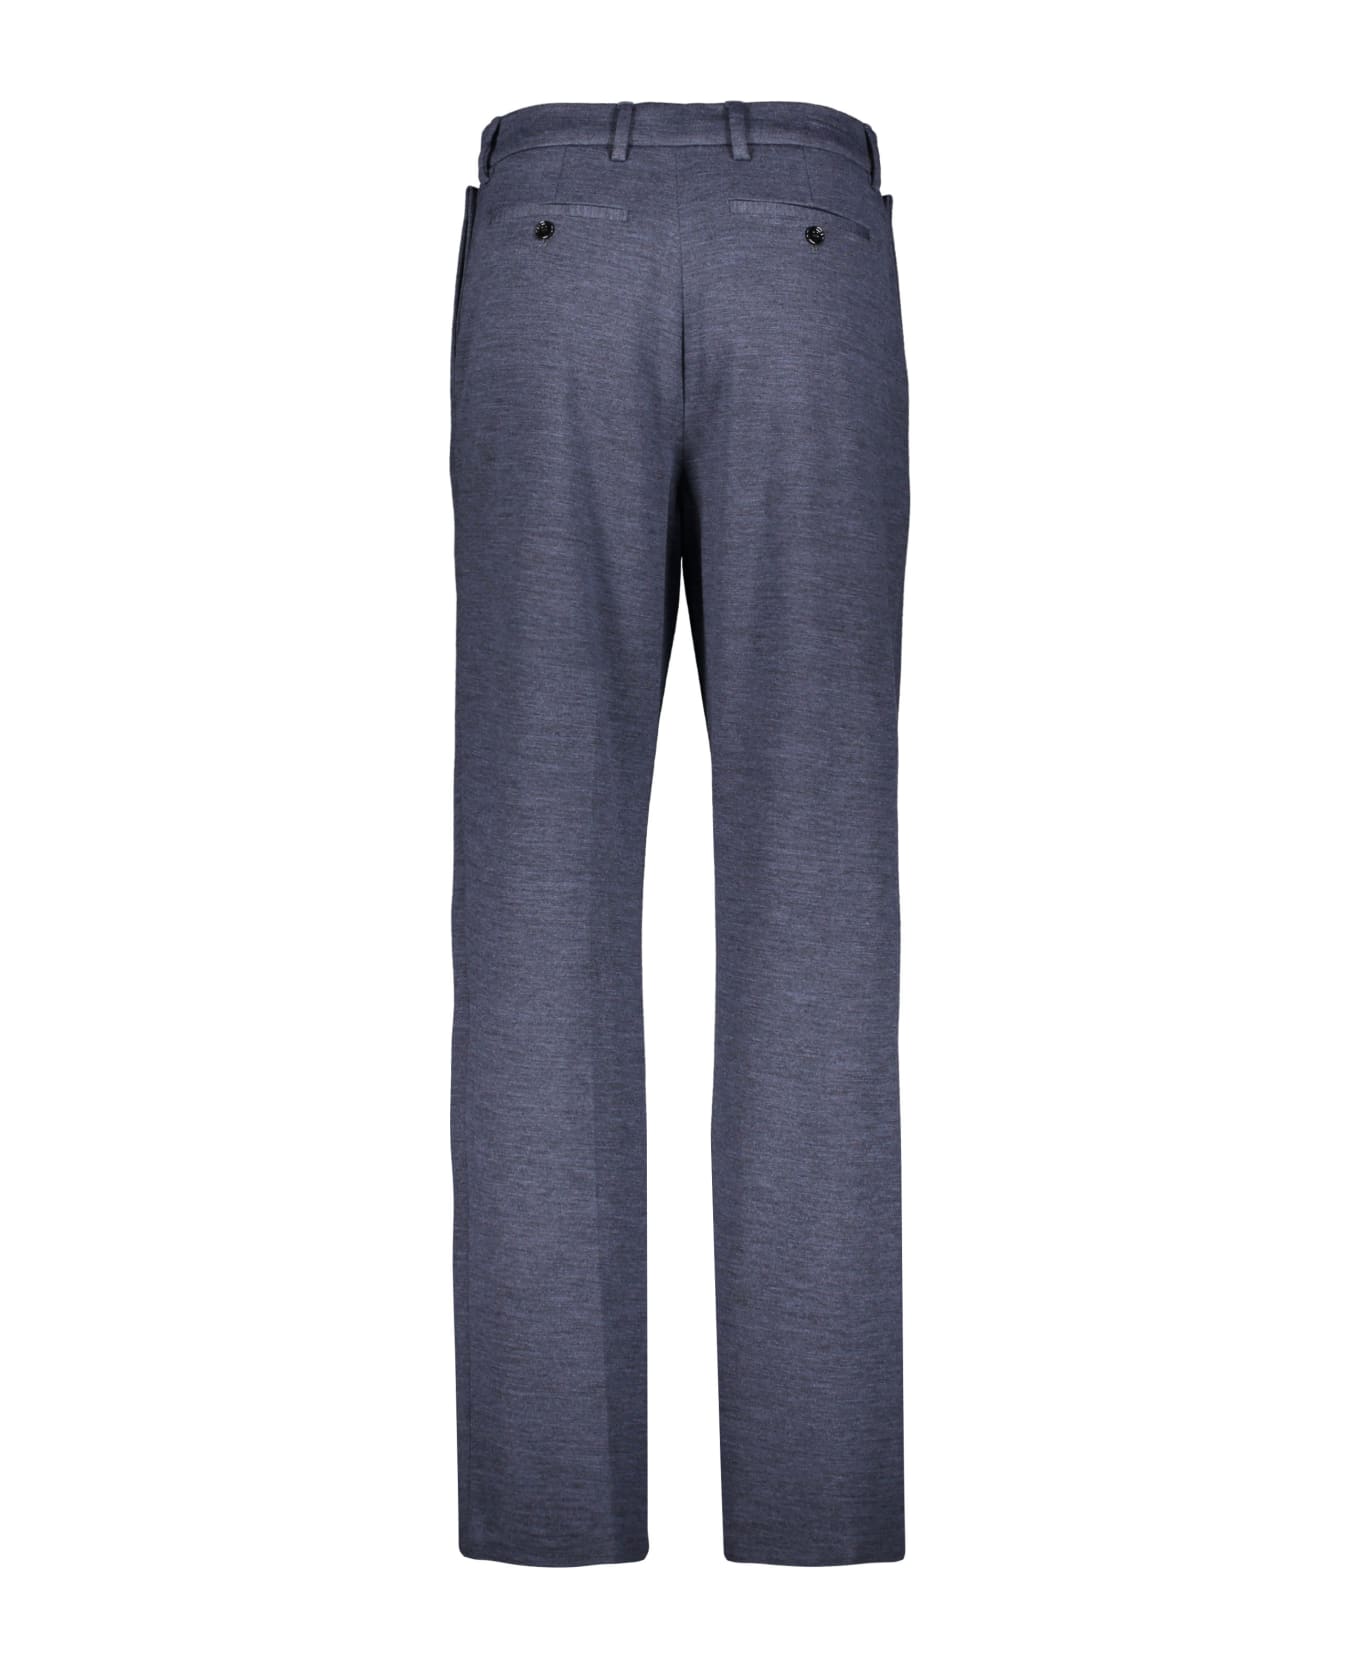 Burberry Wool Trousers - blue ボトムス